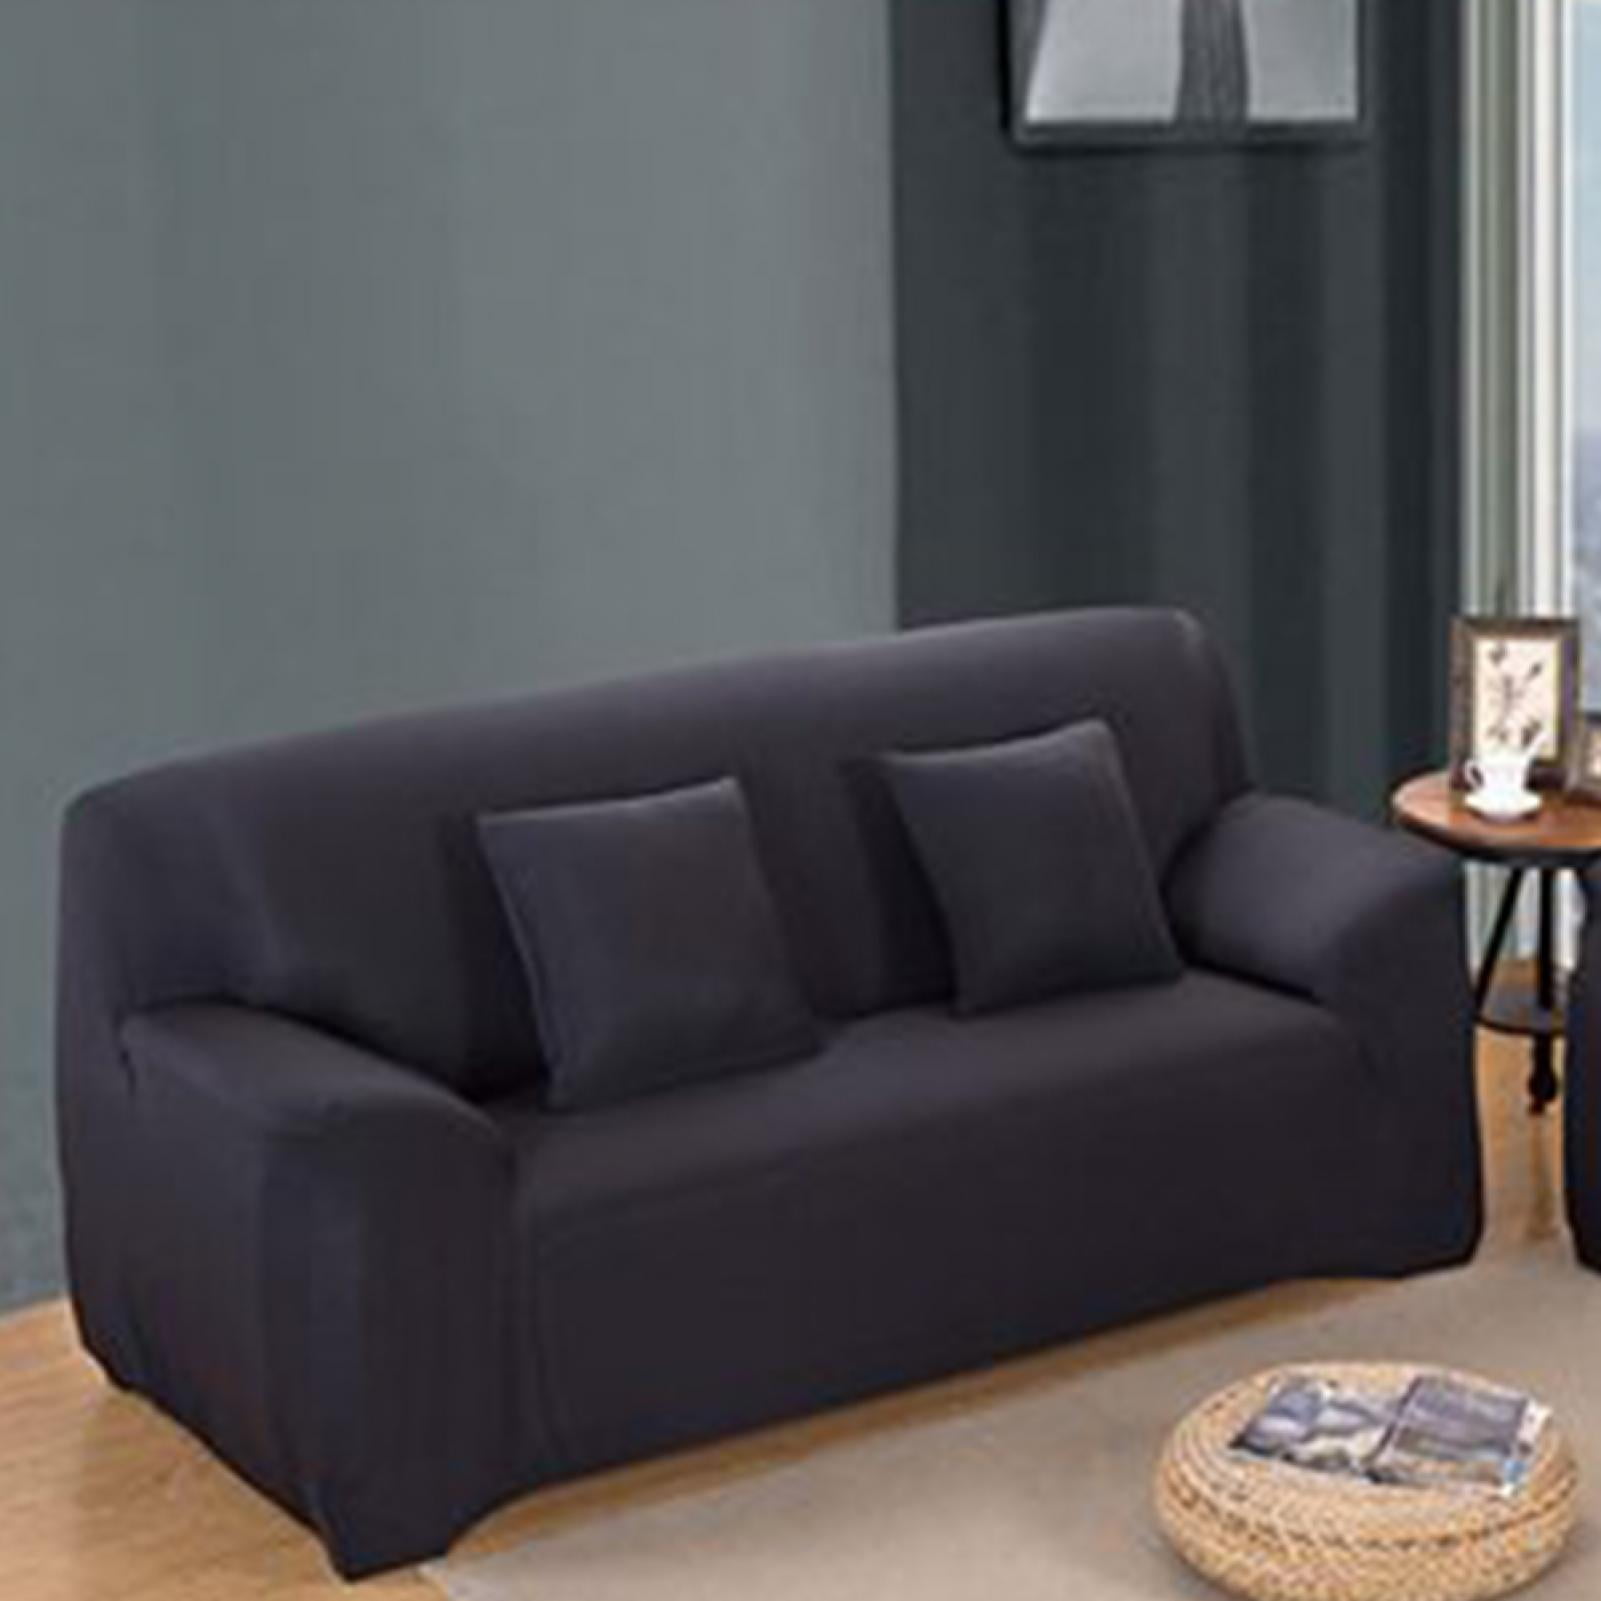 Stretch Elastic, Anti-Wrinkle, Pure Color Slipcover For 1-4 Seater Sofas  For Moving Living Room Furniture (3 Seater, Blue) - Walmart.com